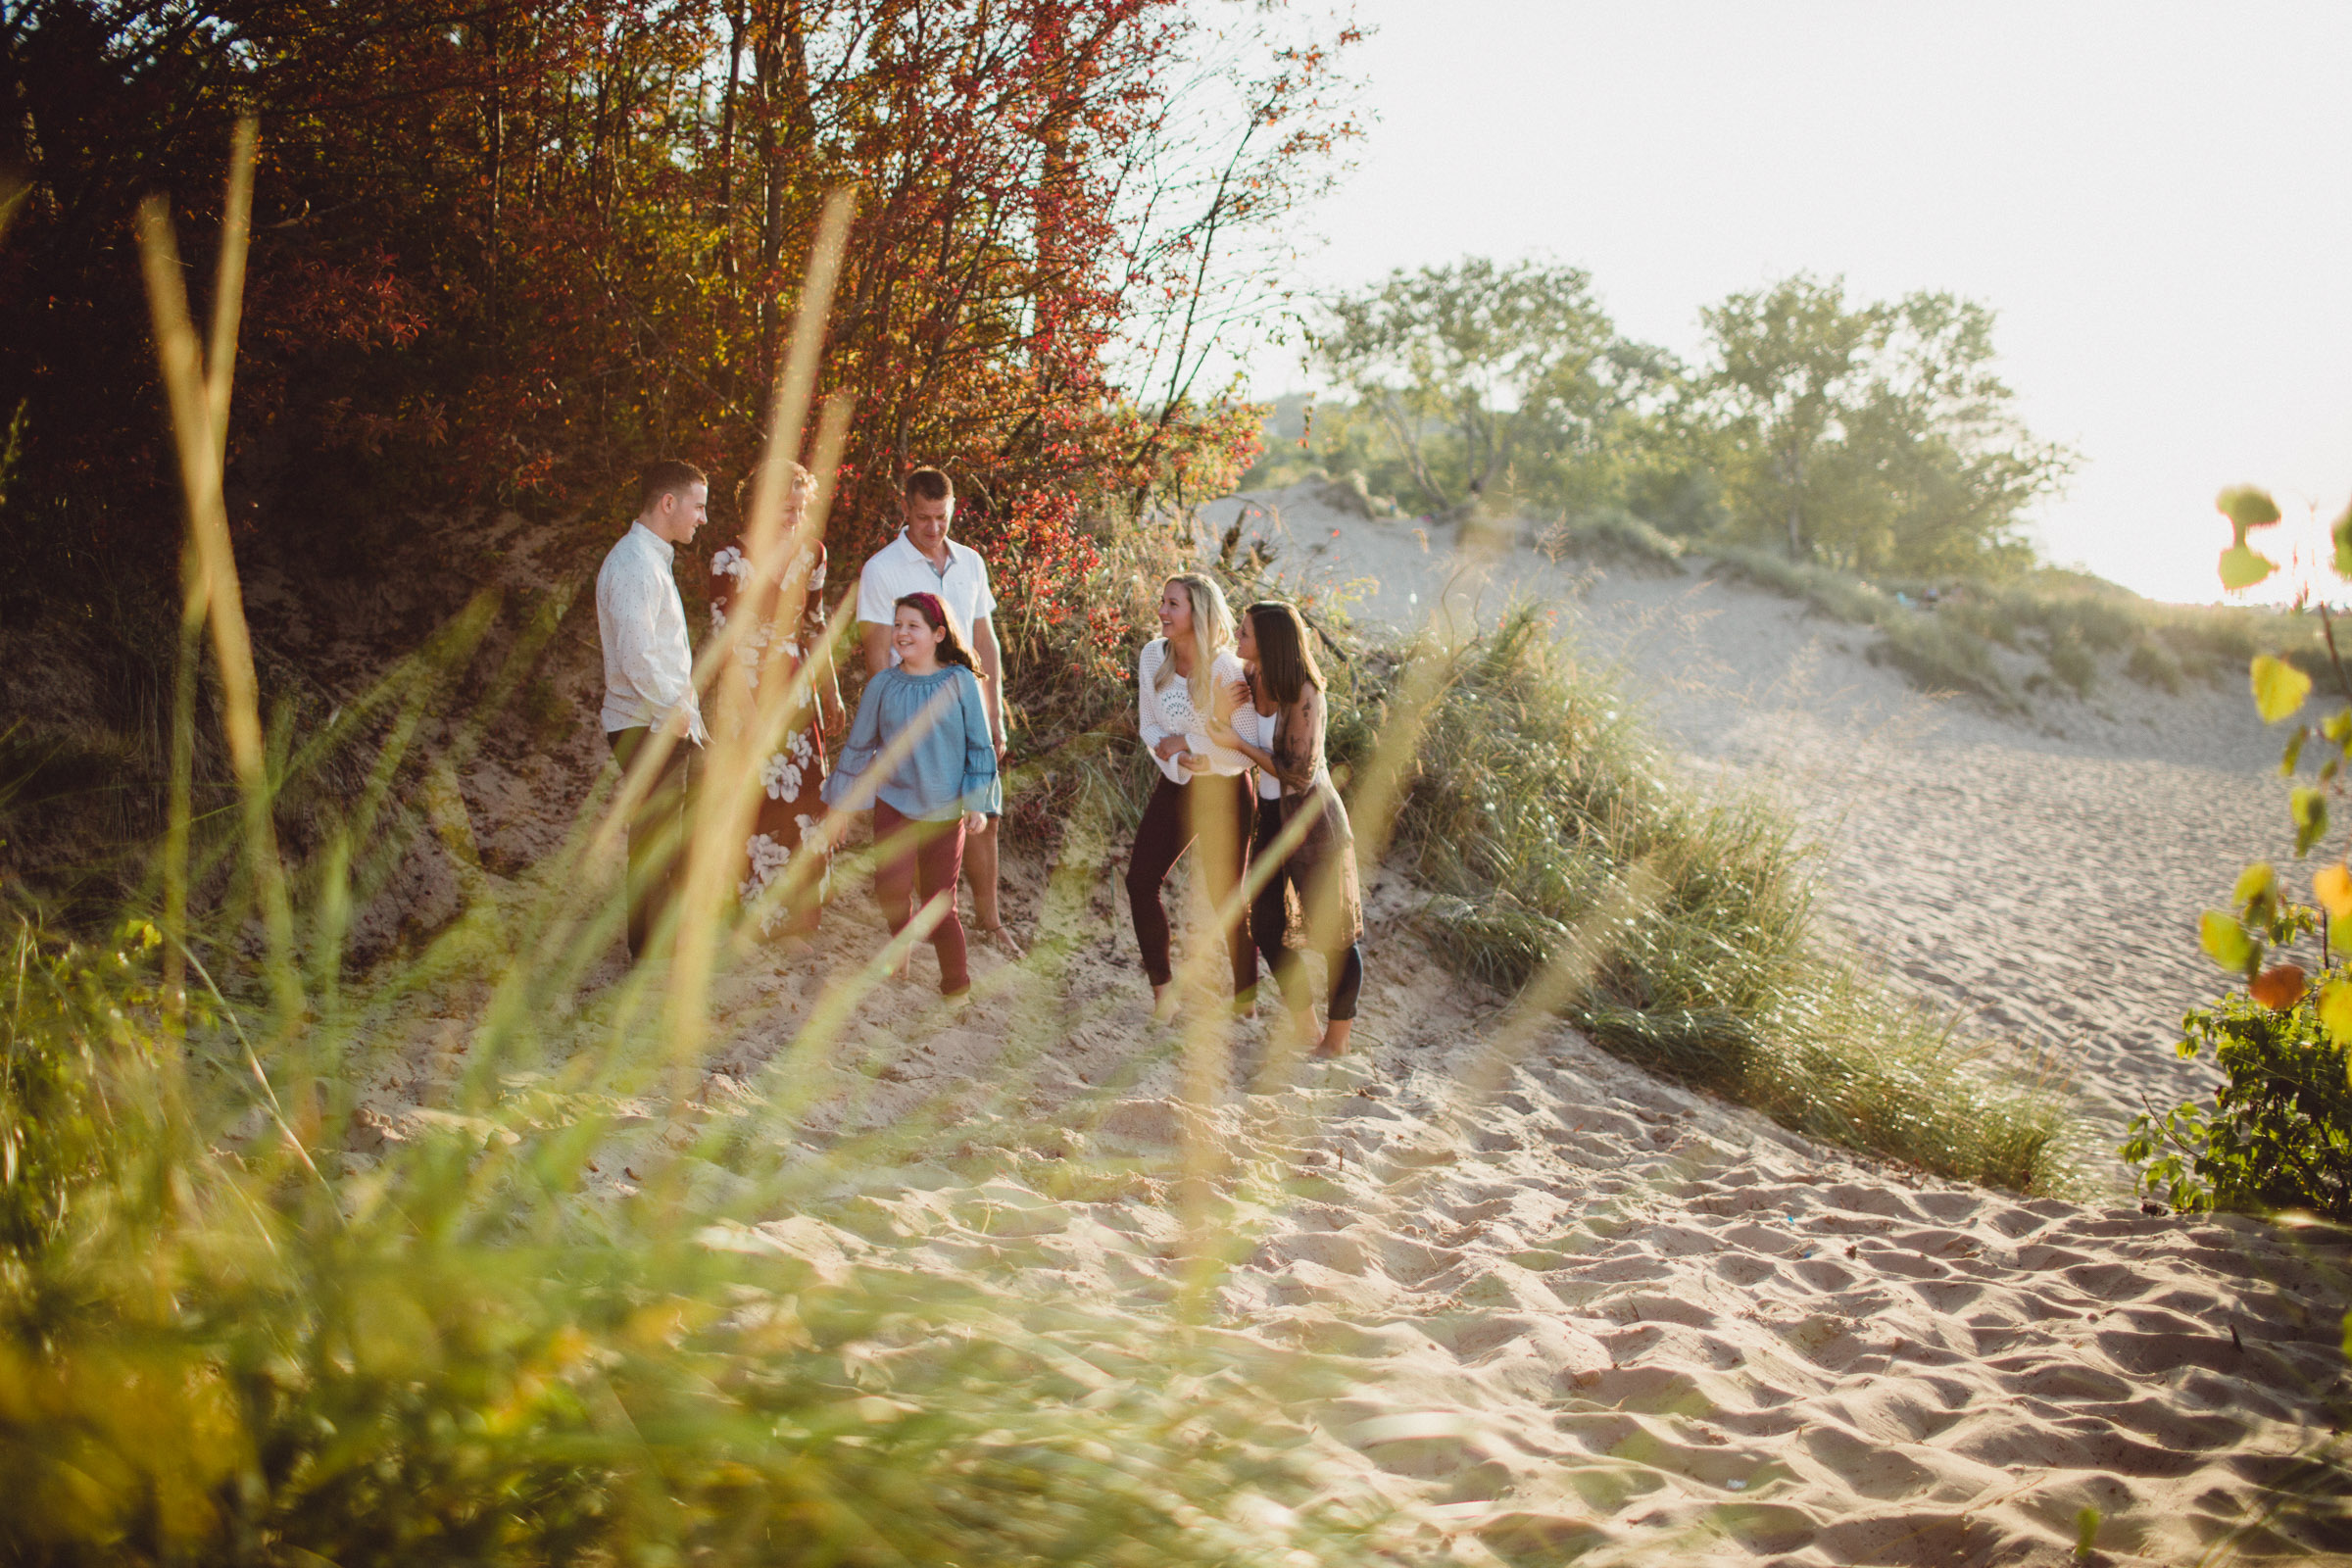 family connecting and interacting on beach, image shot through leaves